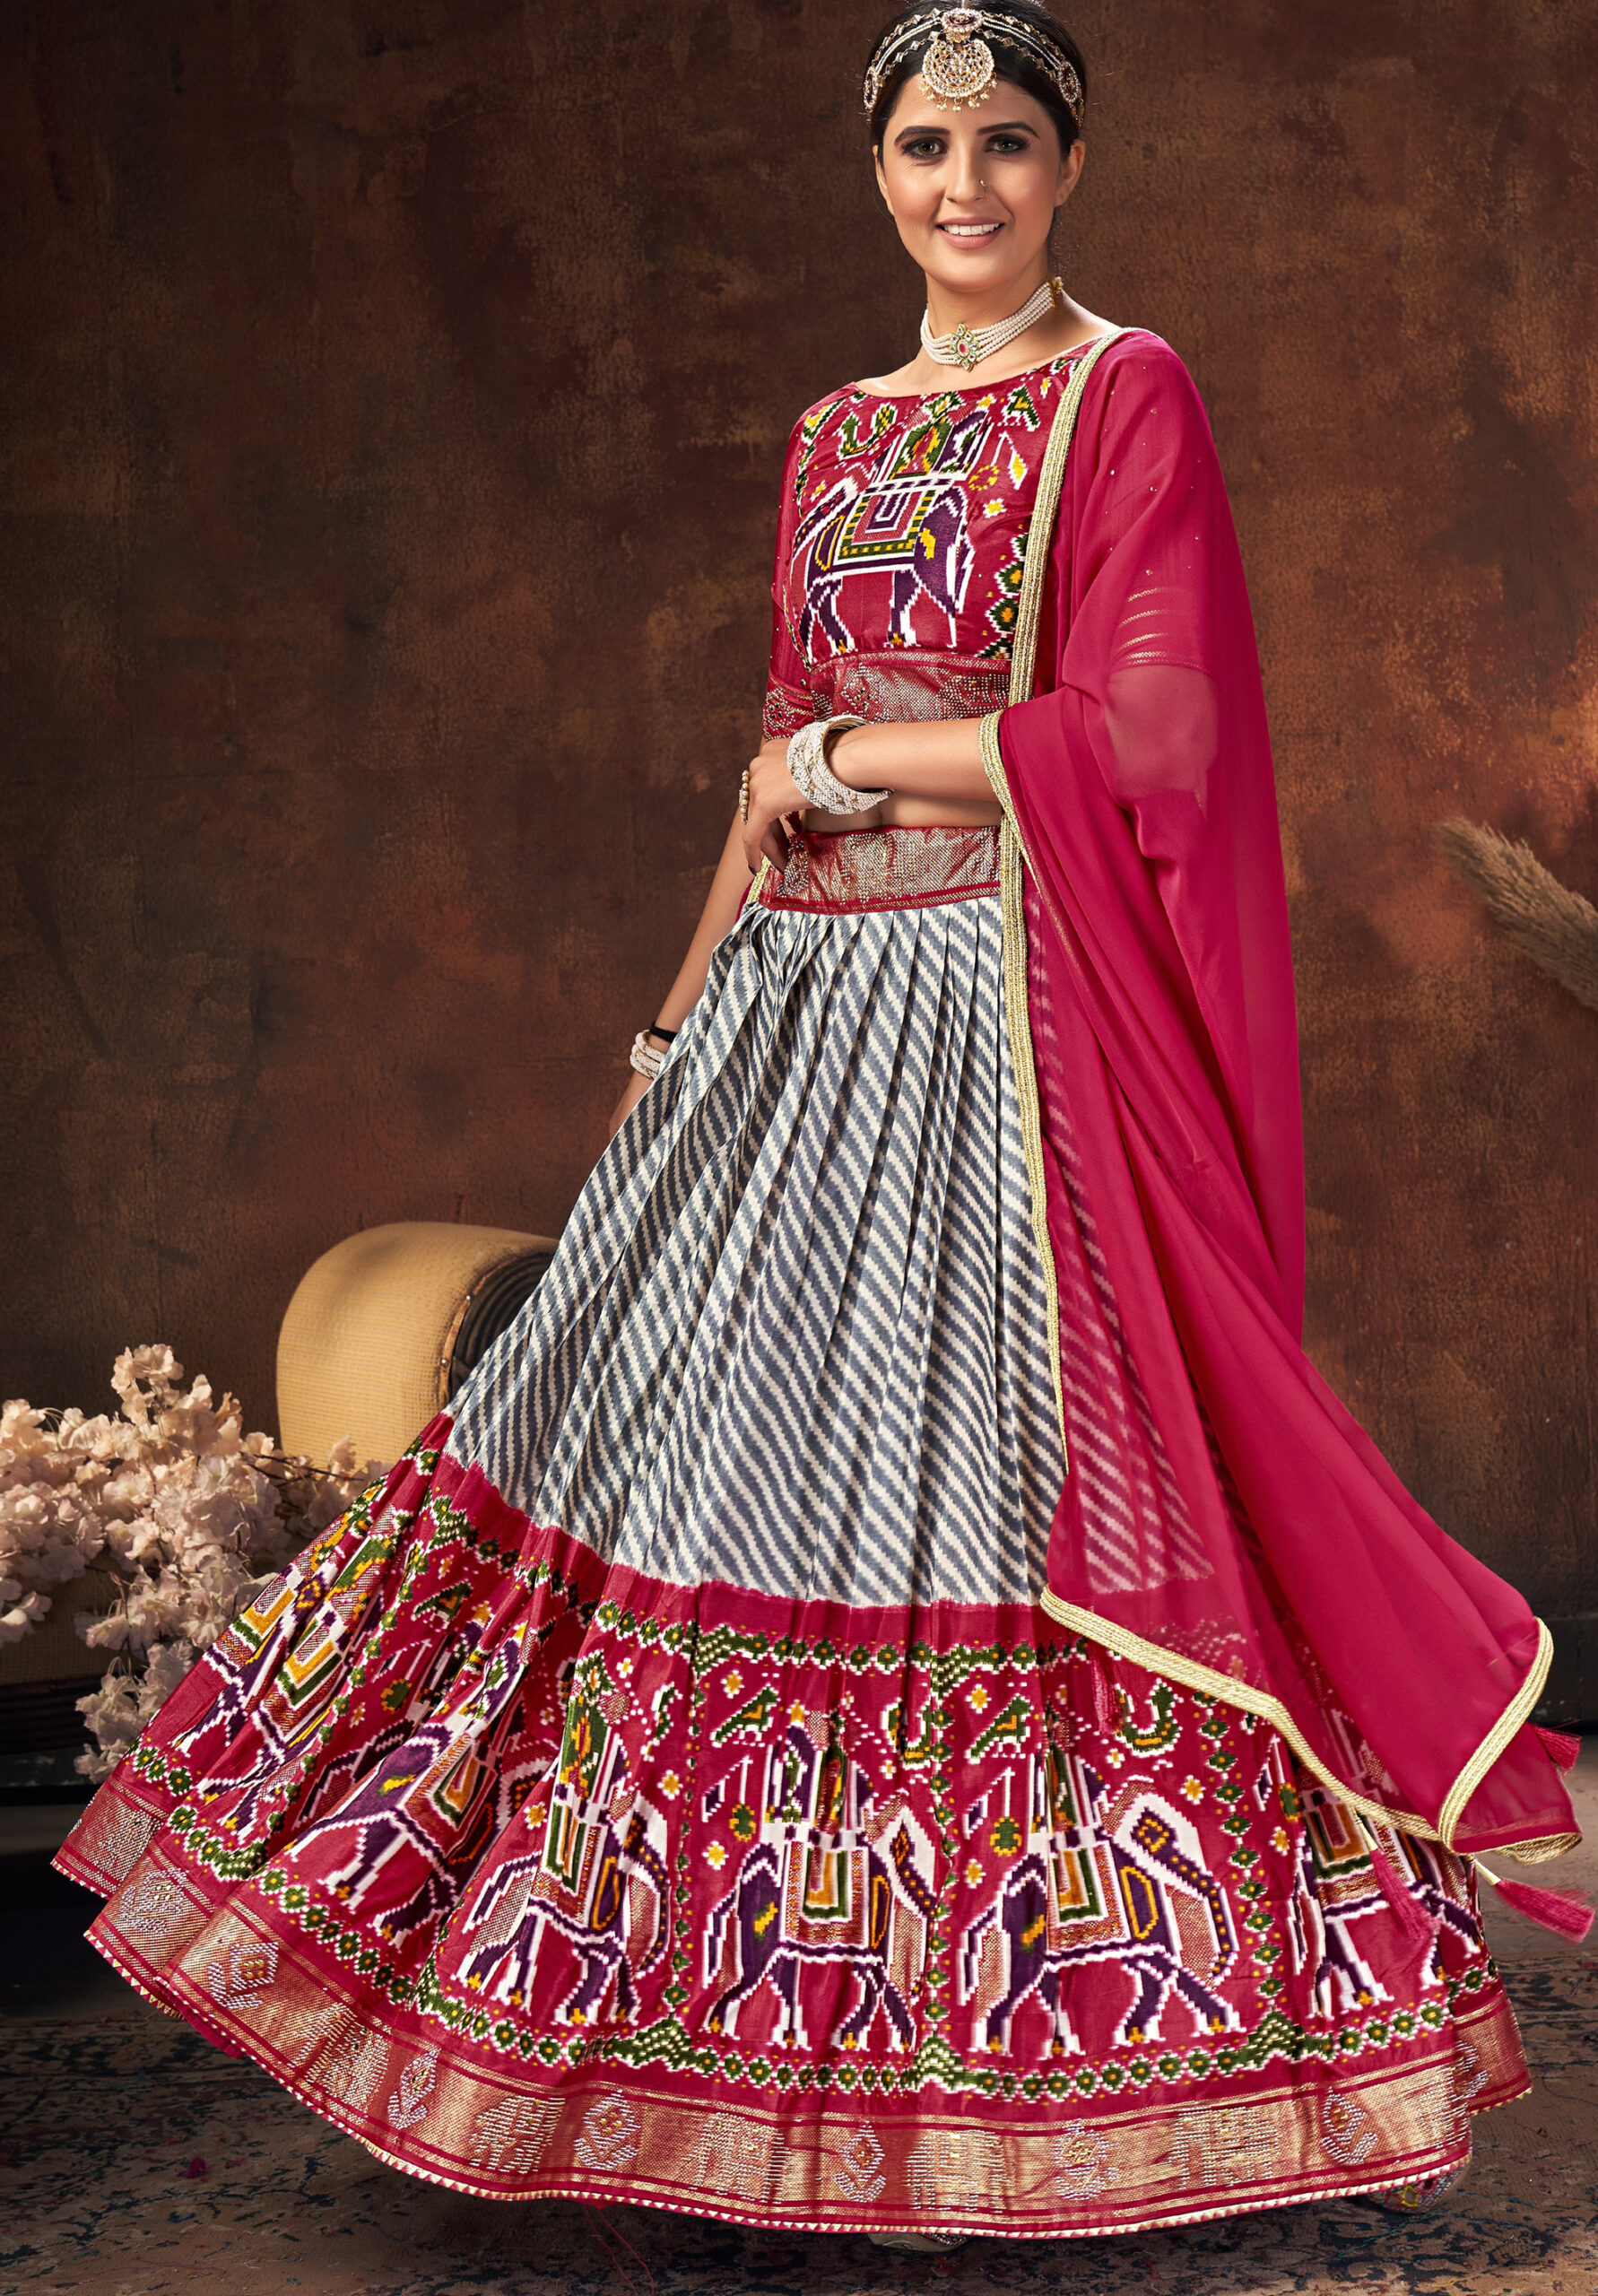 Rajasthani Lehenga Look in Red Colour scaled